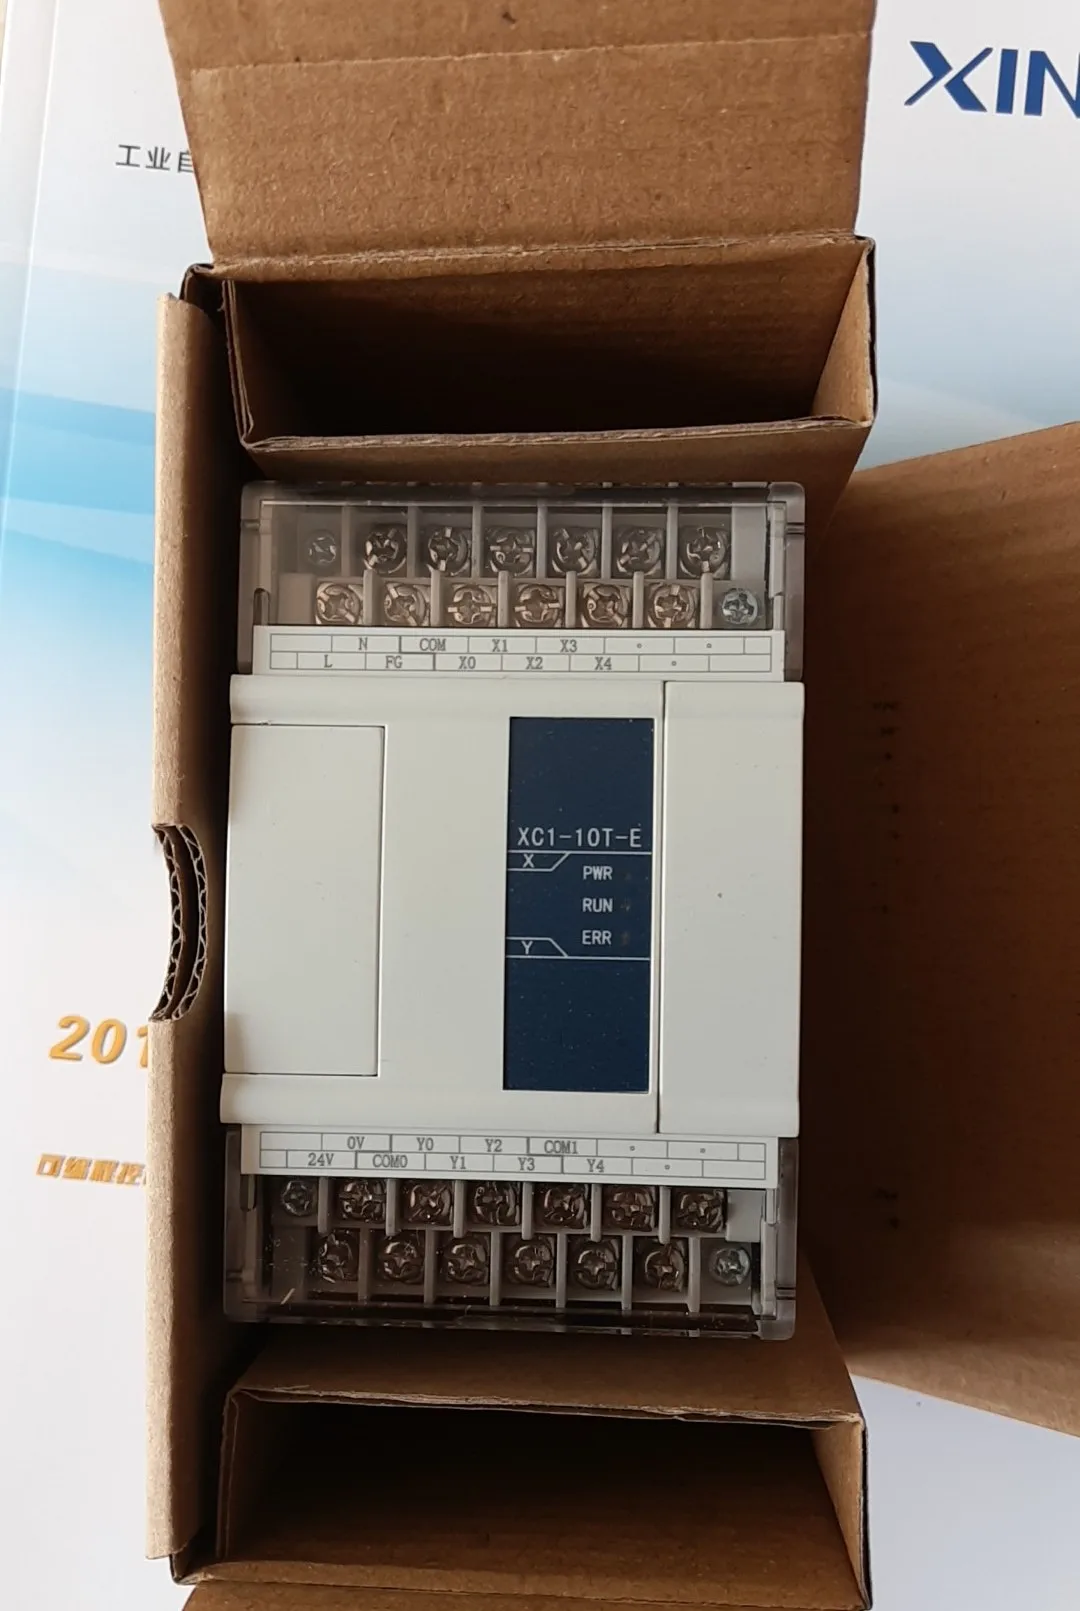 Good quality Programmable Logic Controller PLC Xinjie XC1 series PLC XC1-10T-E High Speed Plc Industrial Control enlarge